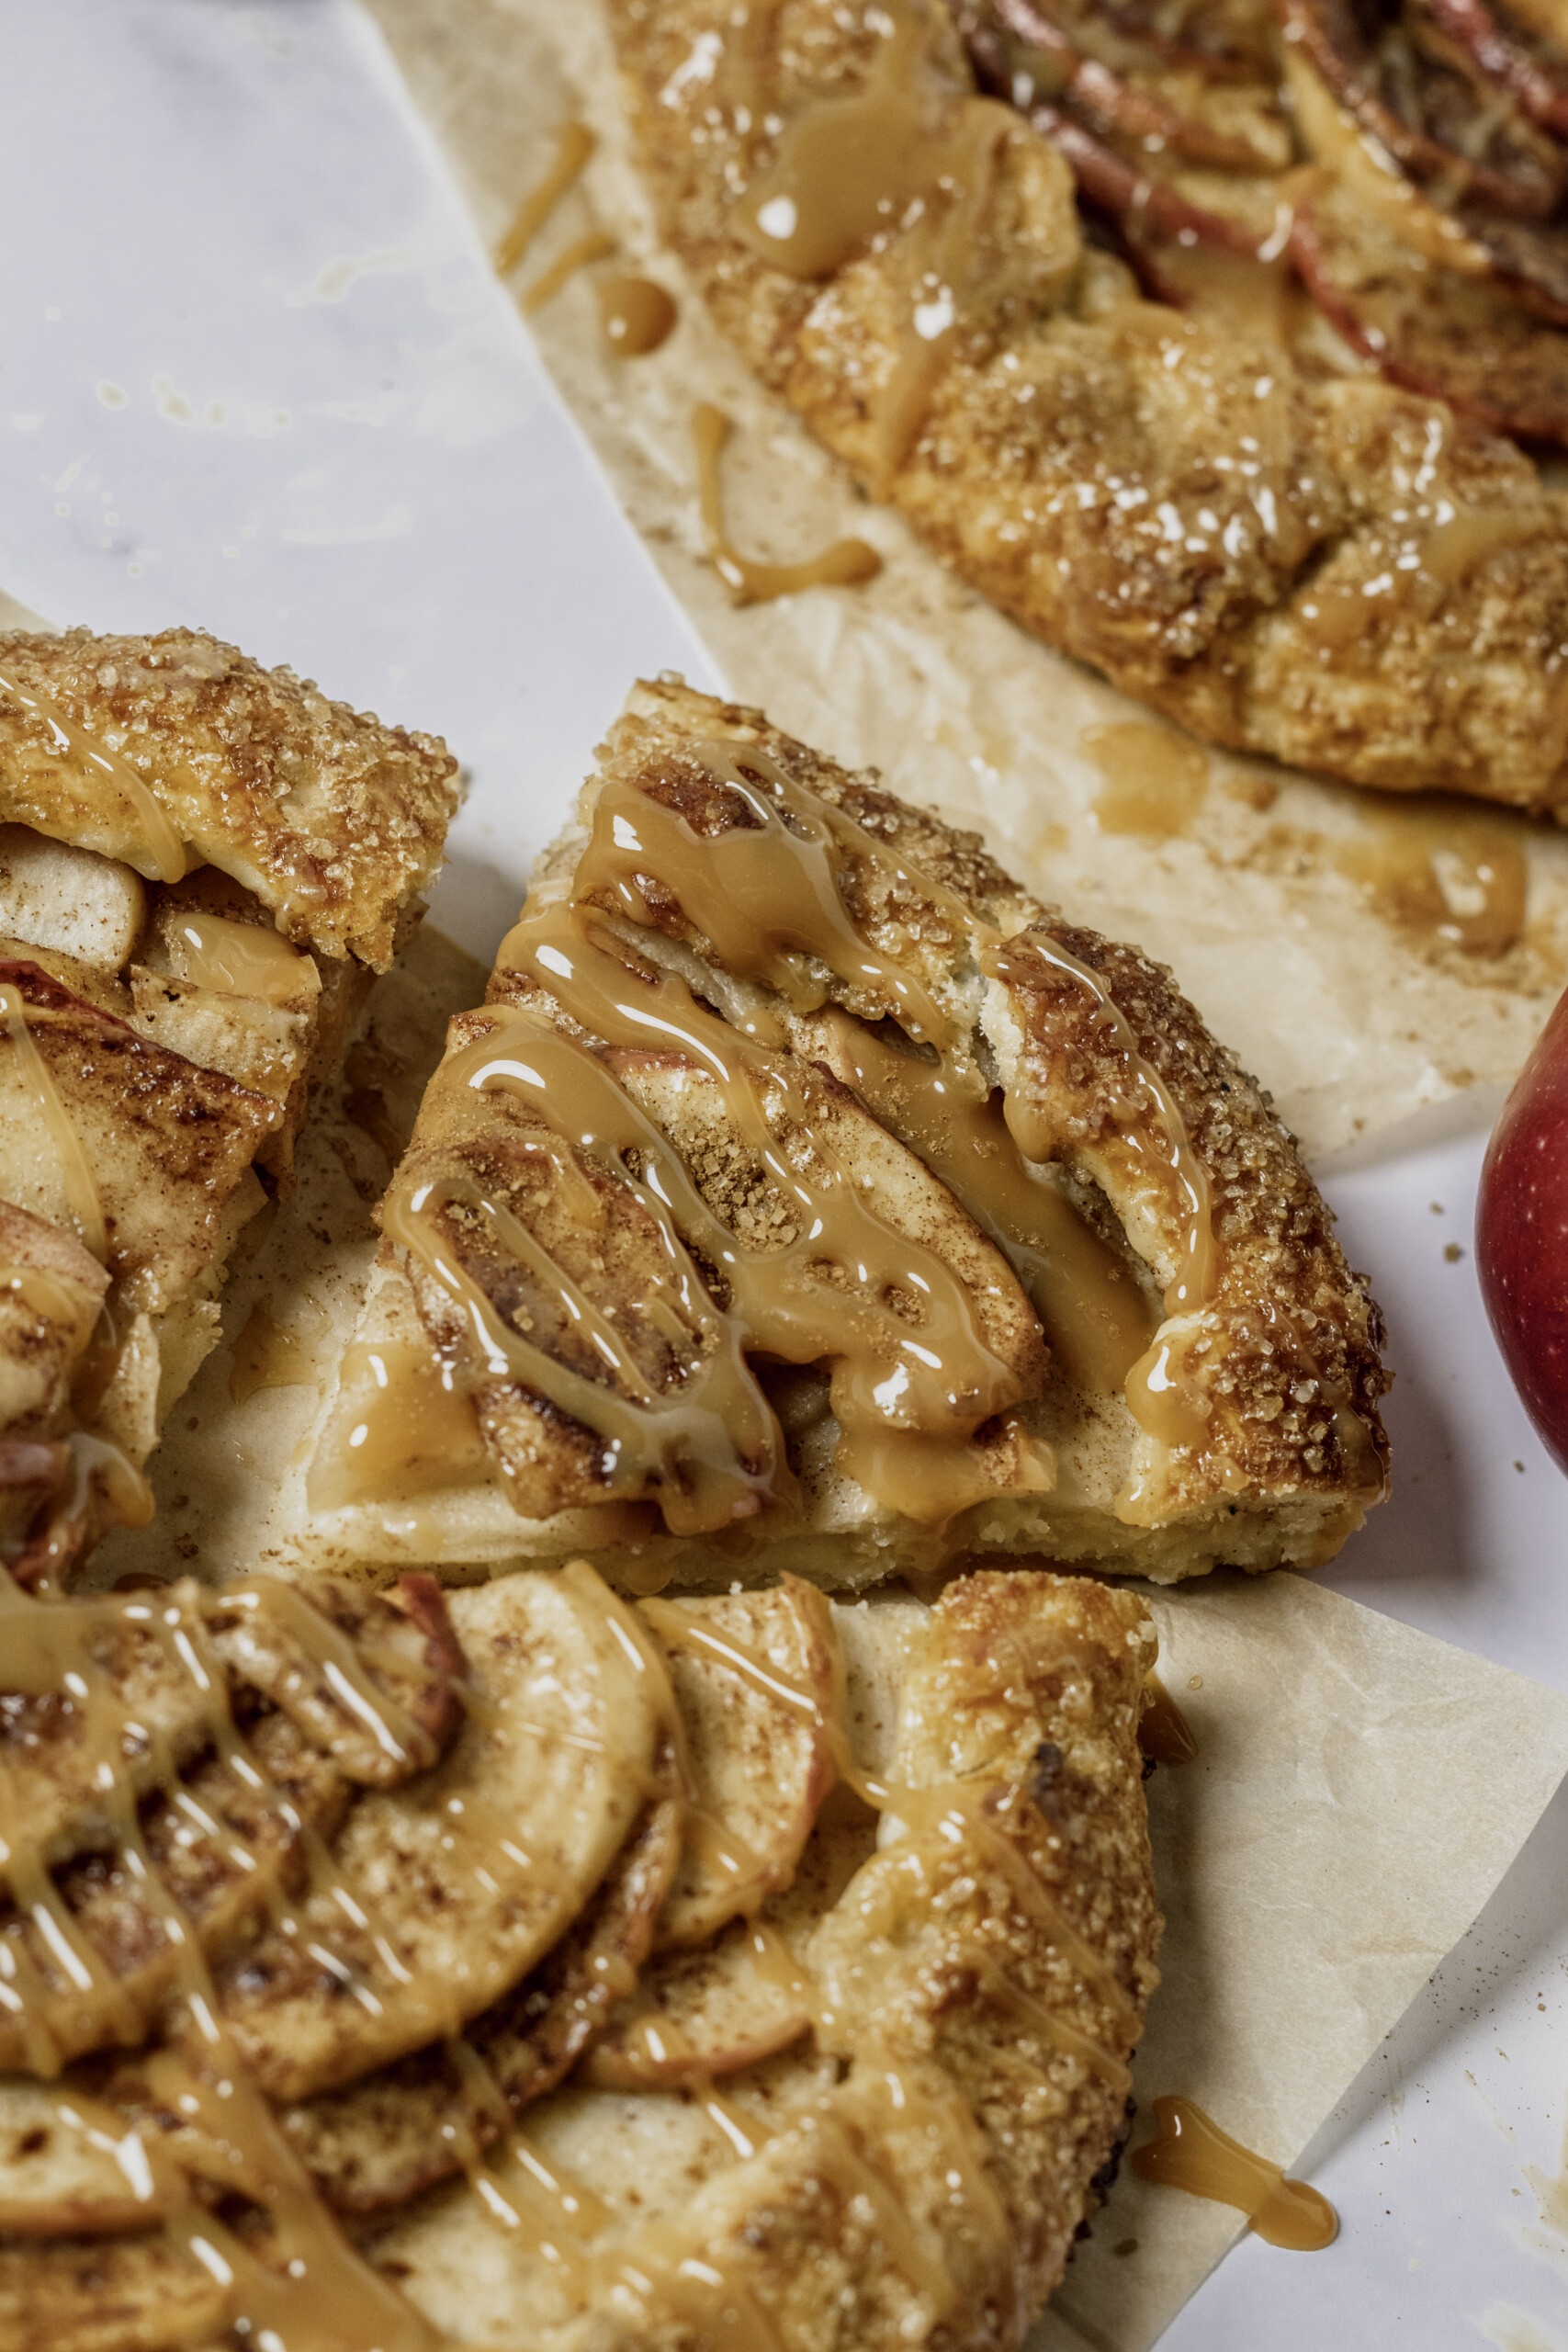 close up image of a slice of apple galette sitting on parchment paper with the remaining apple galette.